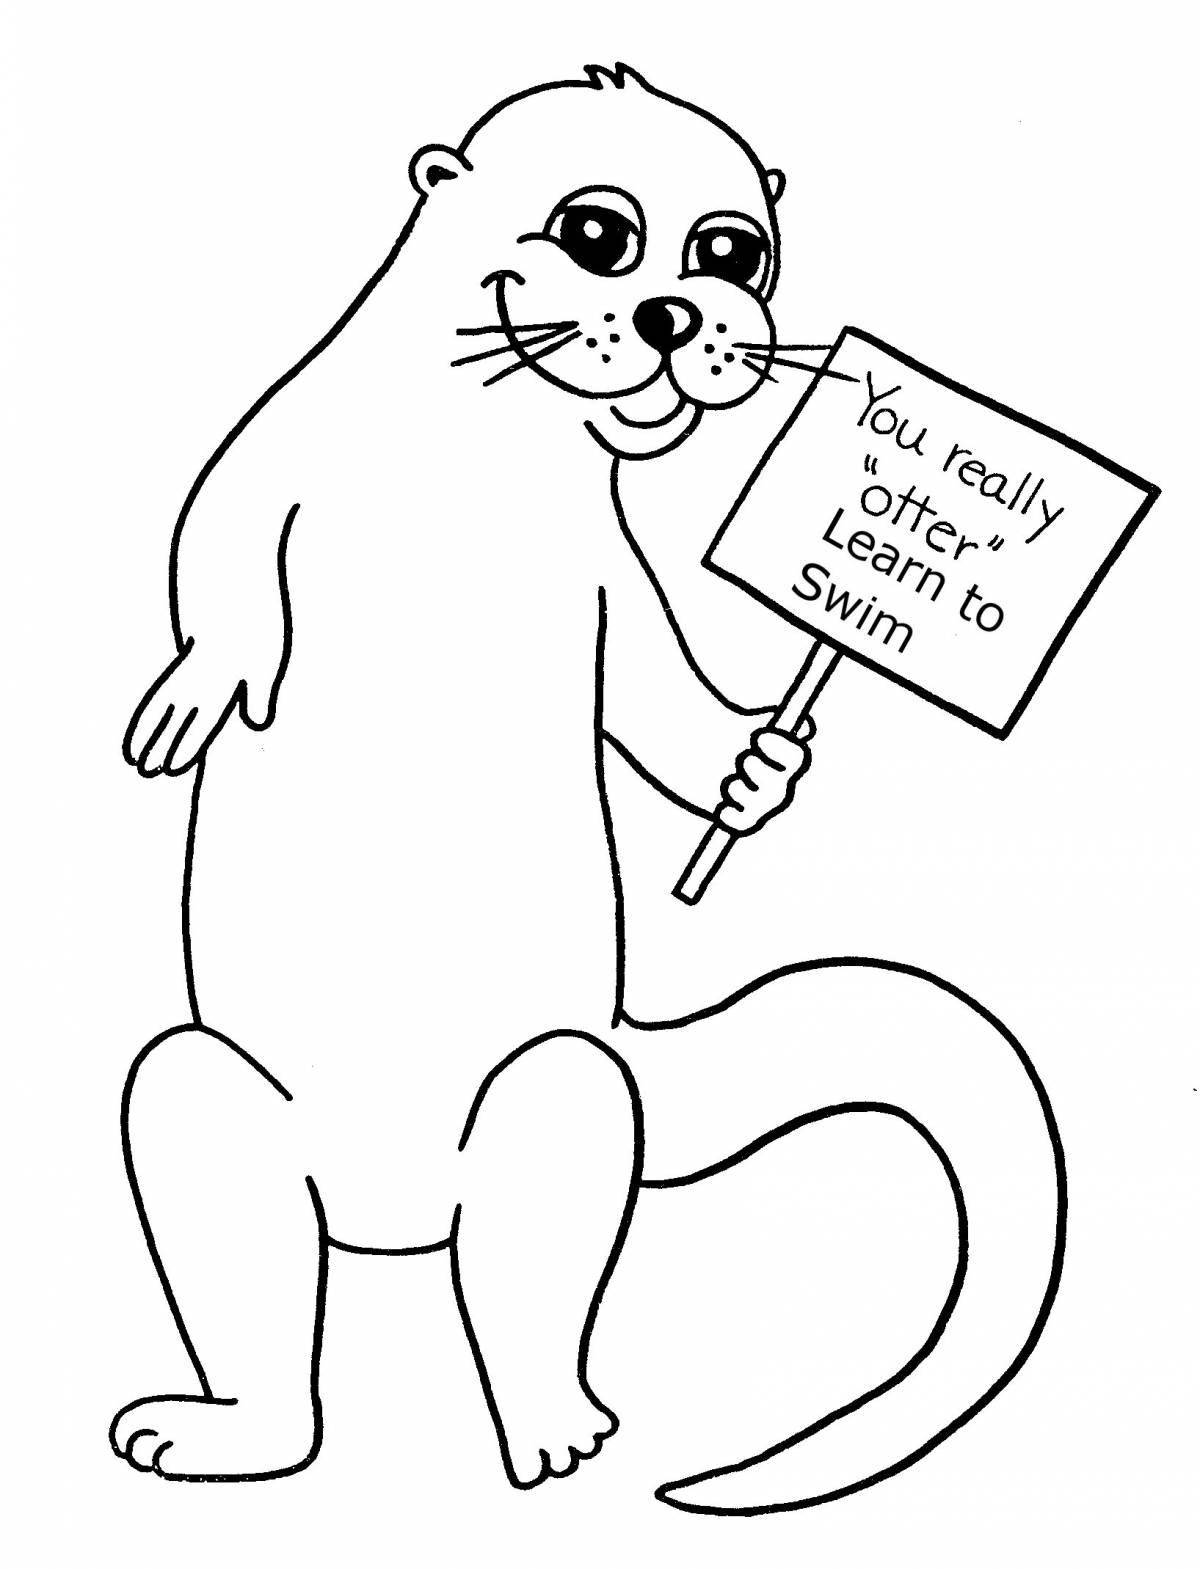 Great otter coloring book for kids